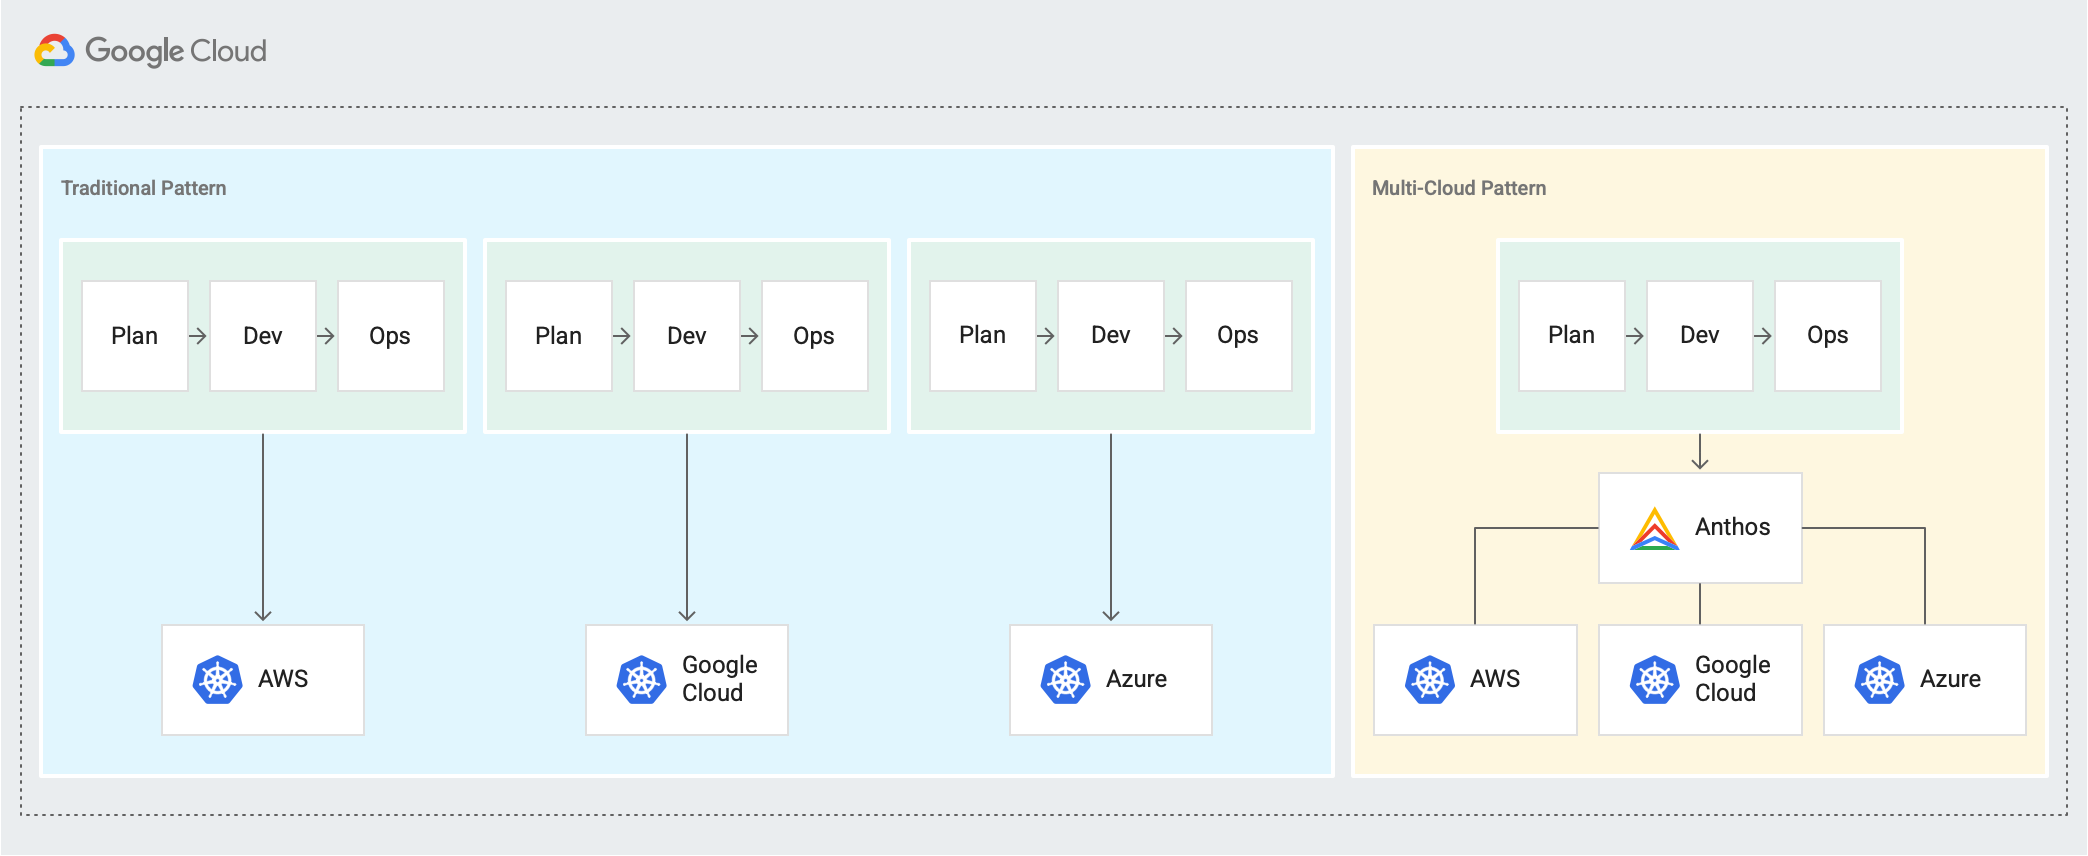 Shows a Traditional pattern of separate Plan → Develop → Operate cycles for AWS, Google Cloud, and Azure and a new Multi-Cloud pattern where Plan → Develop → Operate cycles are connected through Anthos.